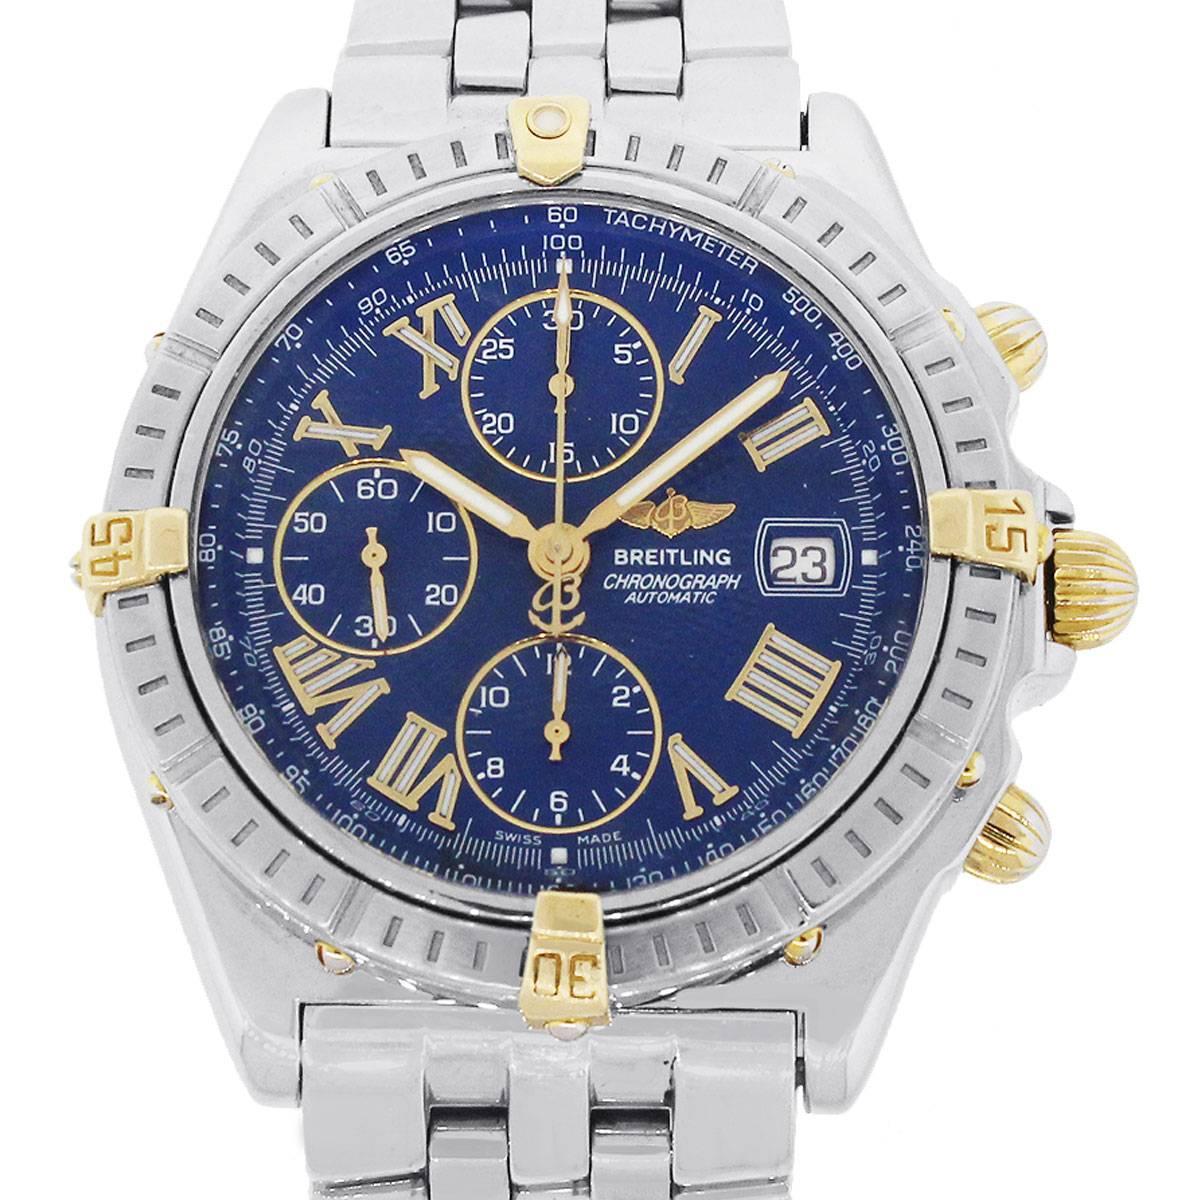 Company: Breitling
Model: Crosswind
MPN: B13055
Case Material: Stainless Steel & Yellow Gold
Case Diameter: 42 mm
Bracelet: Stainless Steel
Dial: White Chronograph Dial with Luminescent Hands and Yellow Gold Roman Numeral Markers
Crystal: Scratch